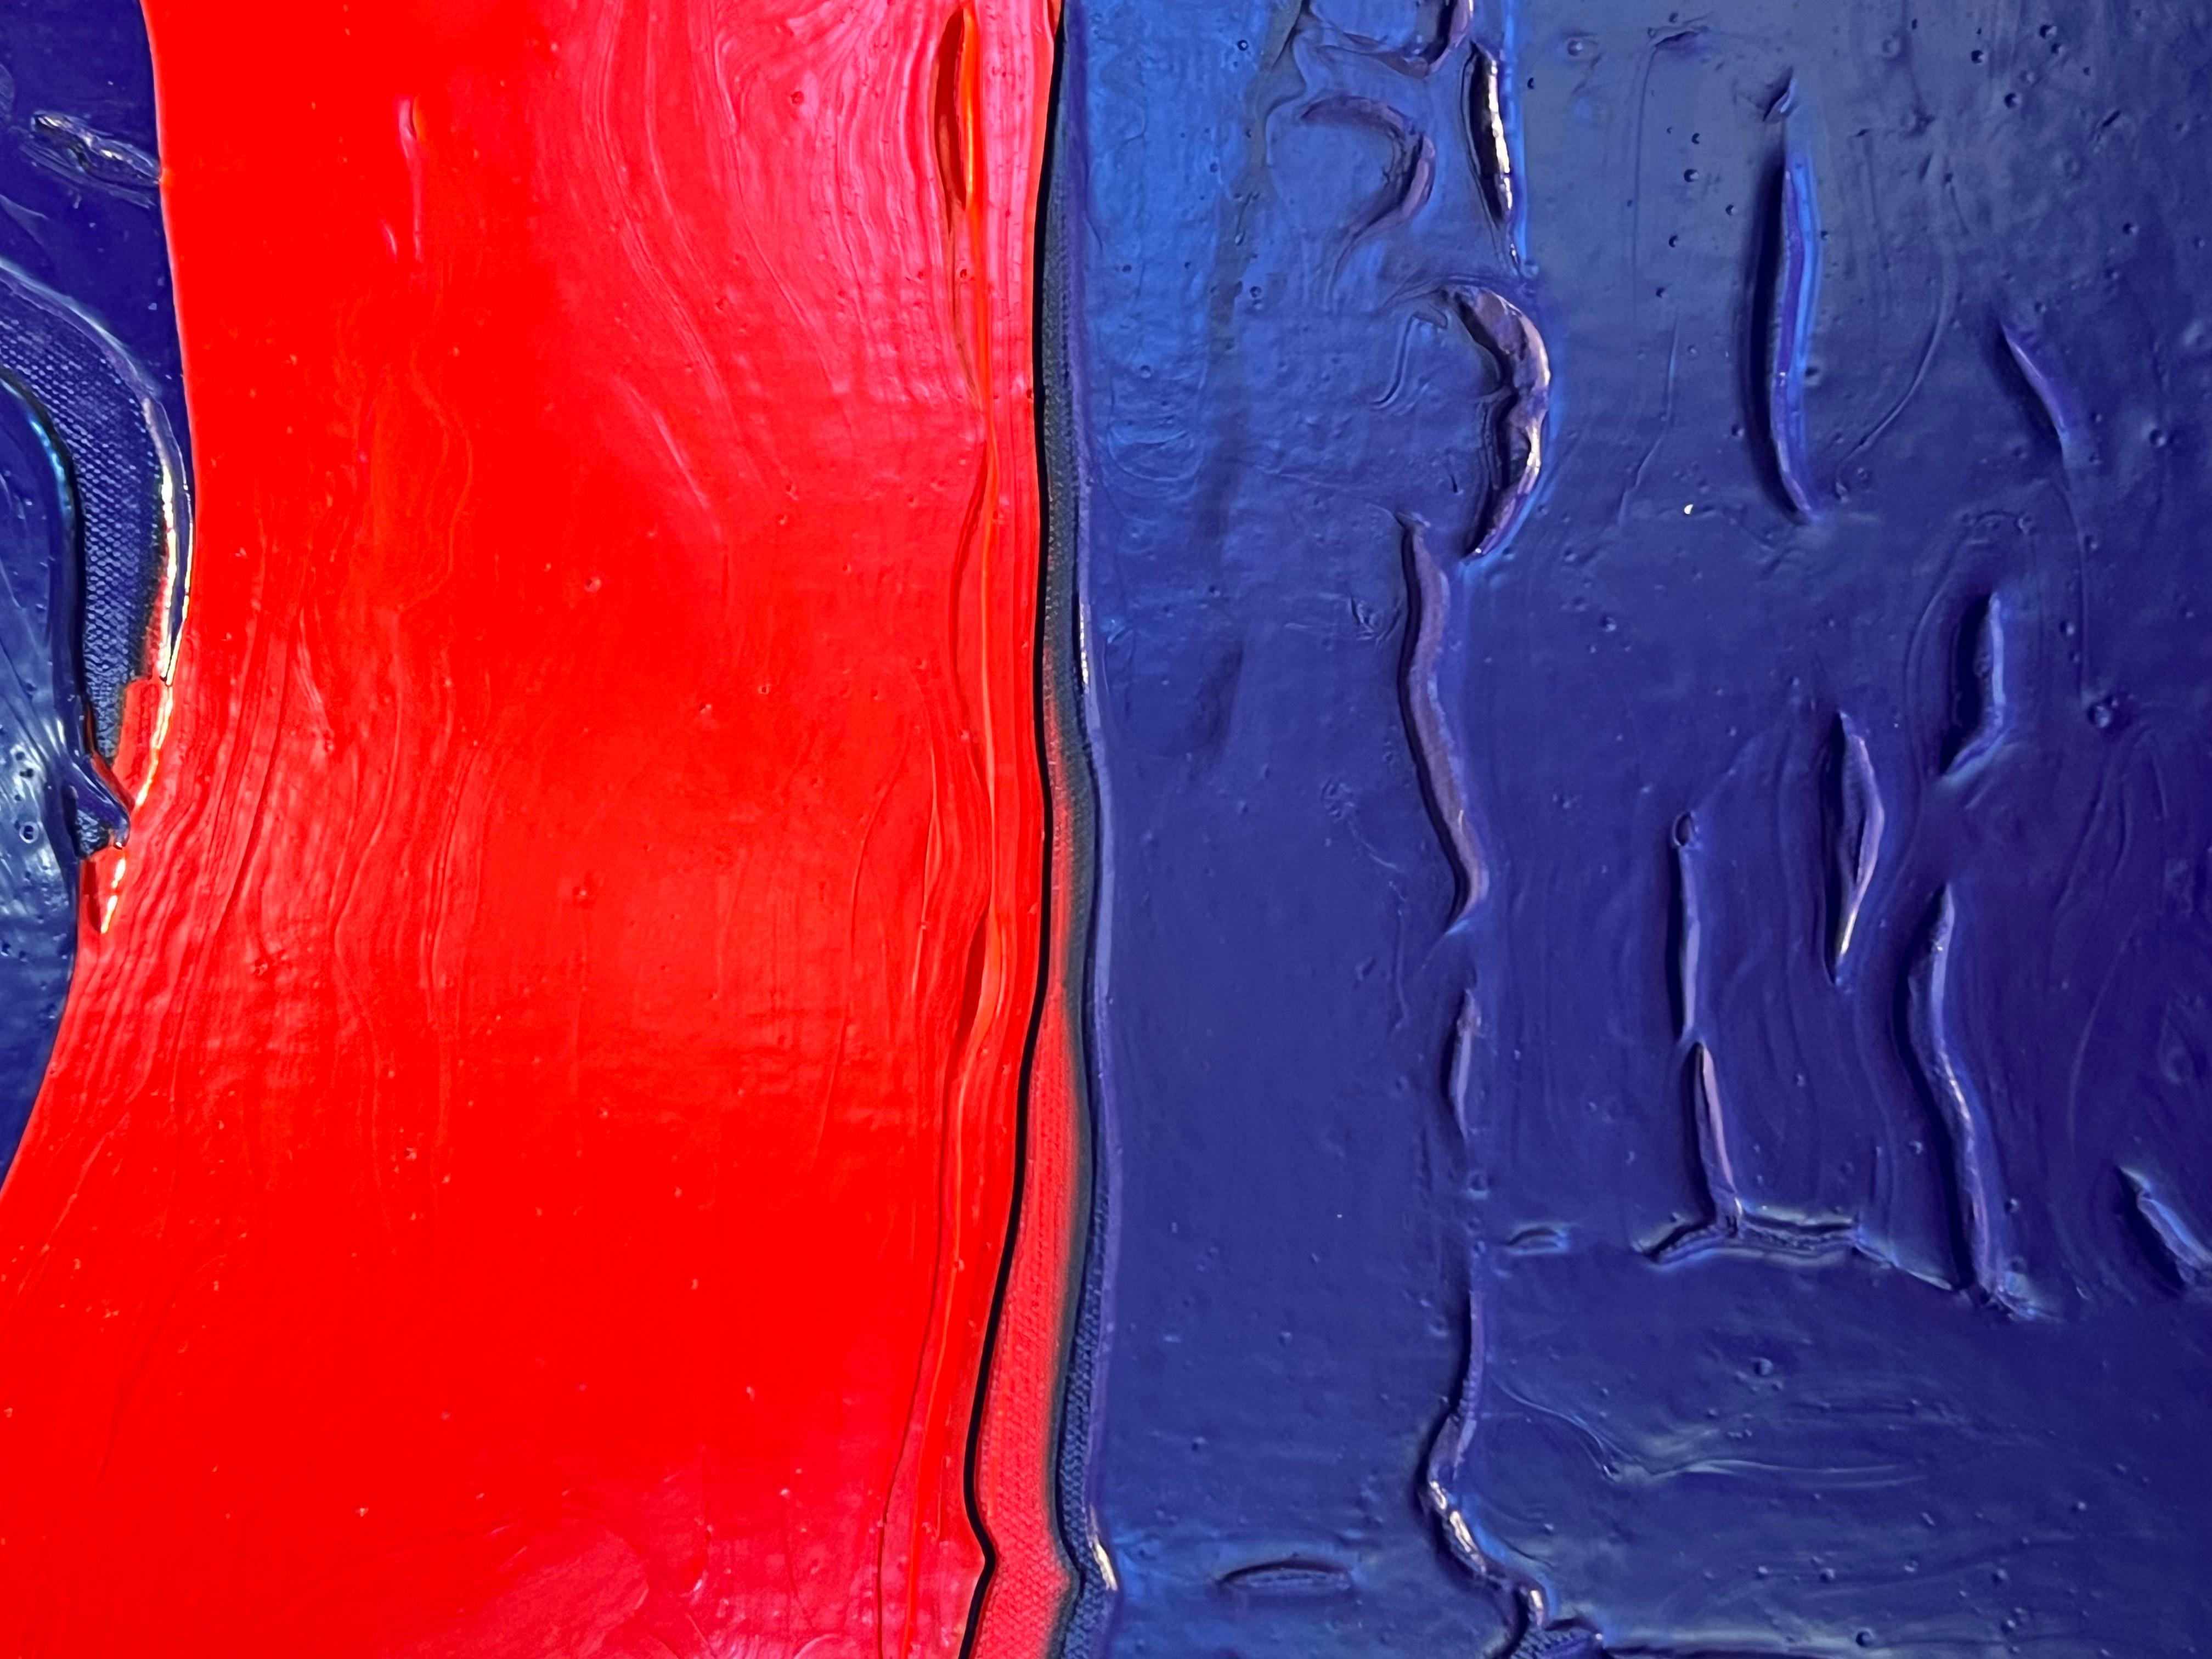 Silver Cloud, by Glenn Green, painting, blue, silver, red, abstract, textured For Sale 3